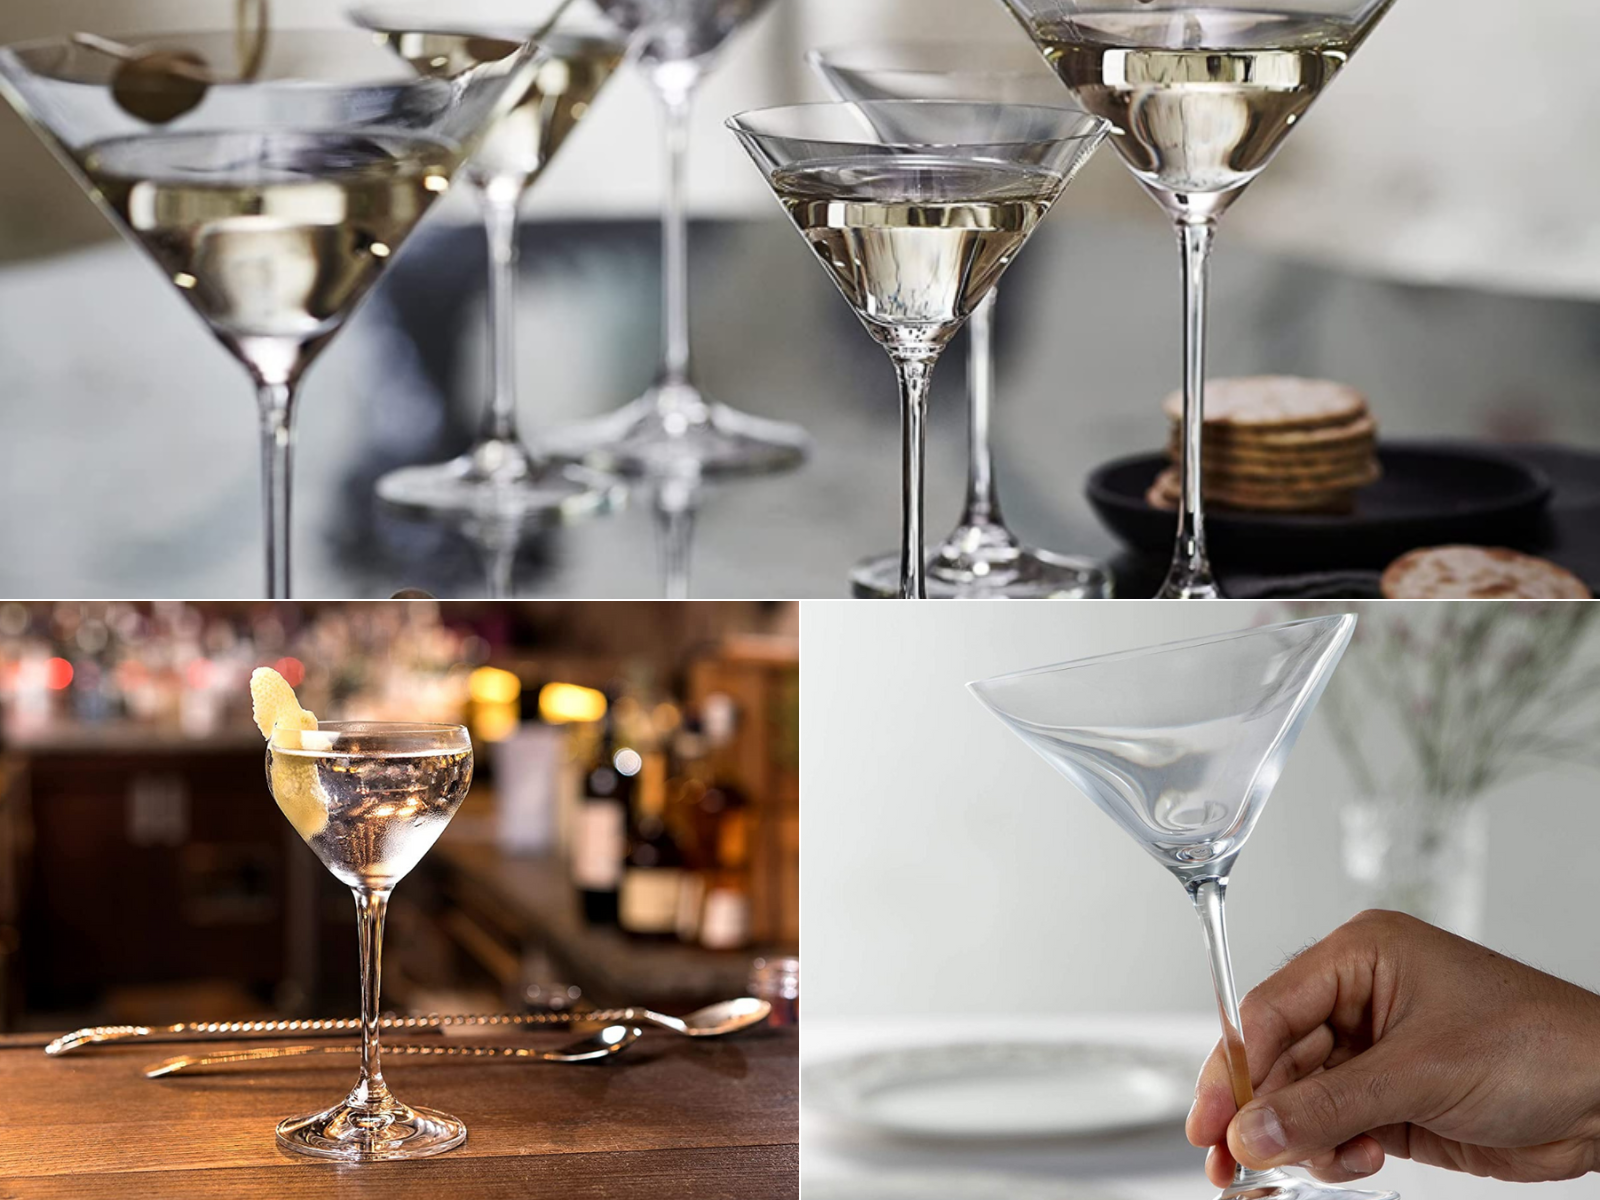 Martini glasses shown 3 ways, both full and empty with 1 being held by someone.